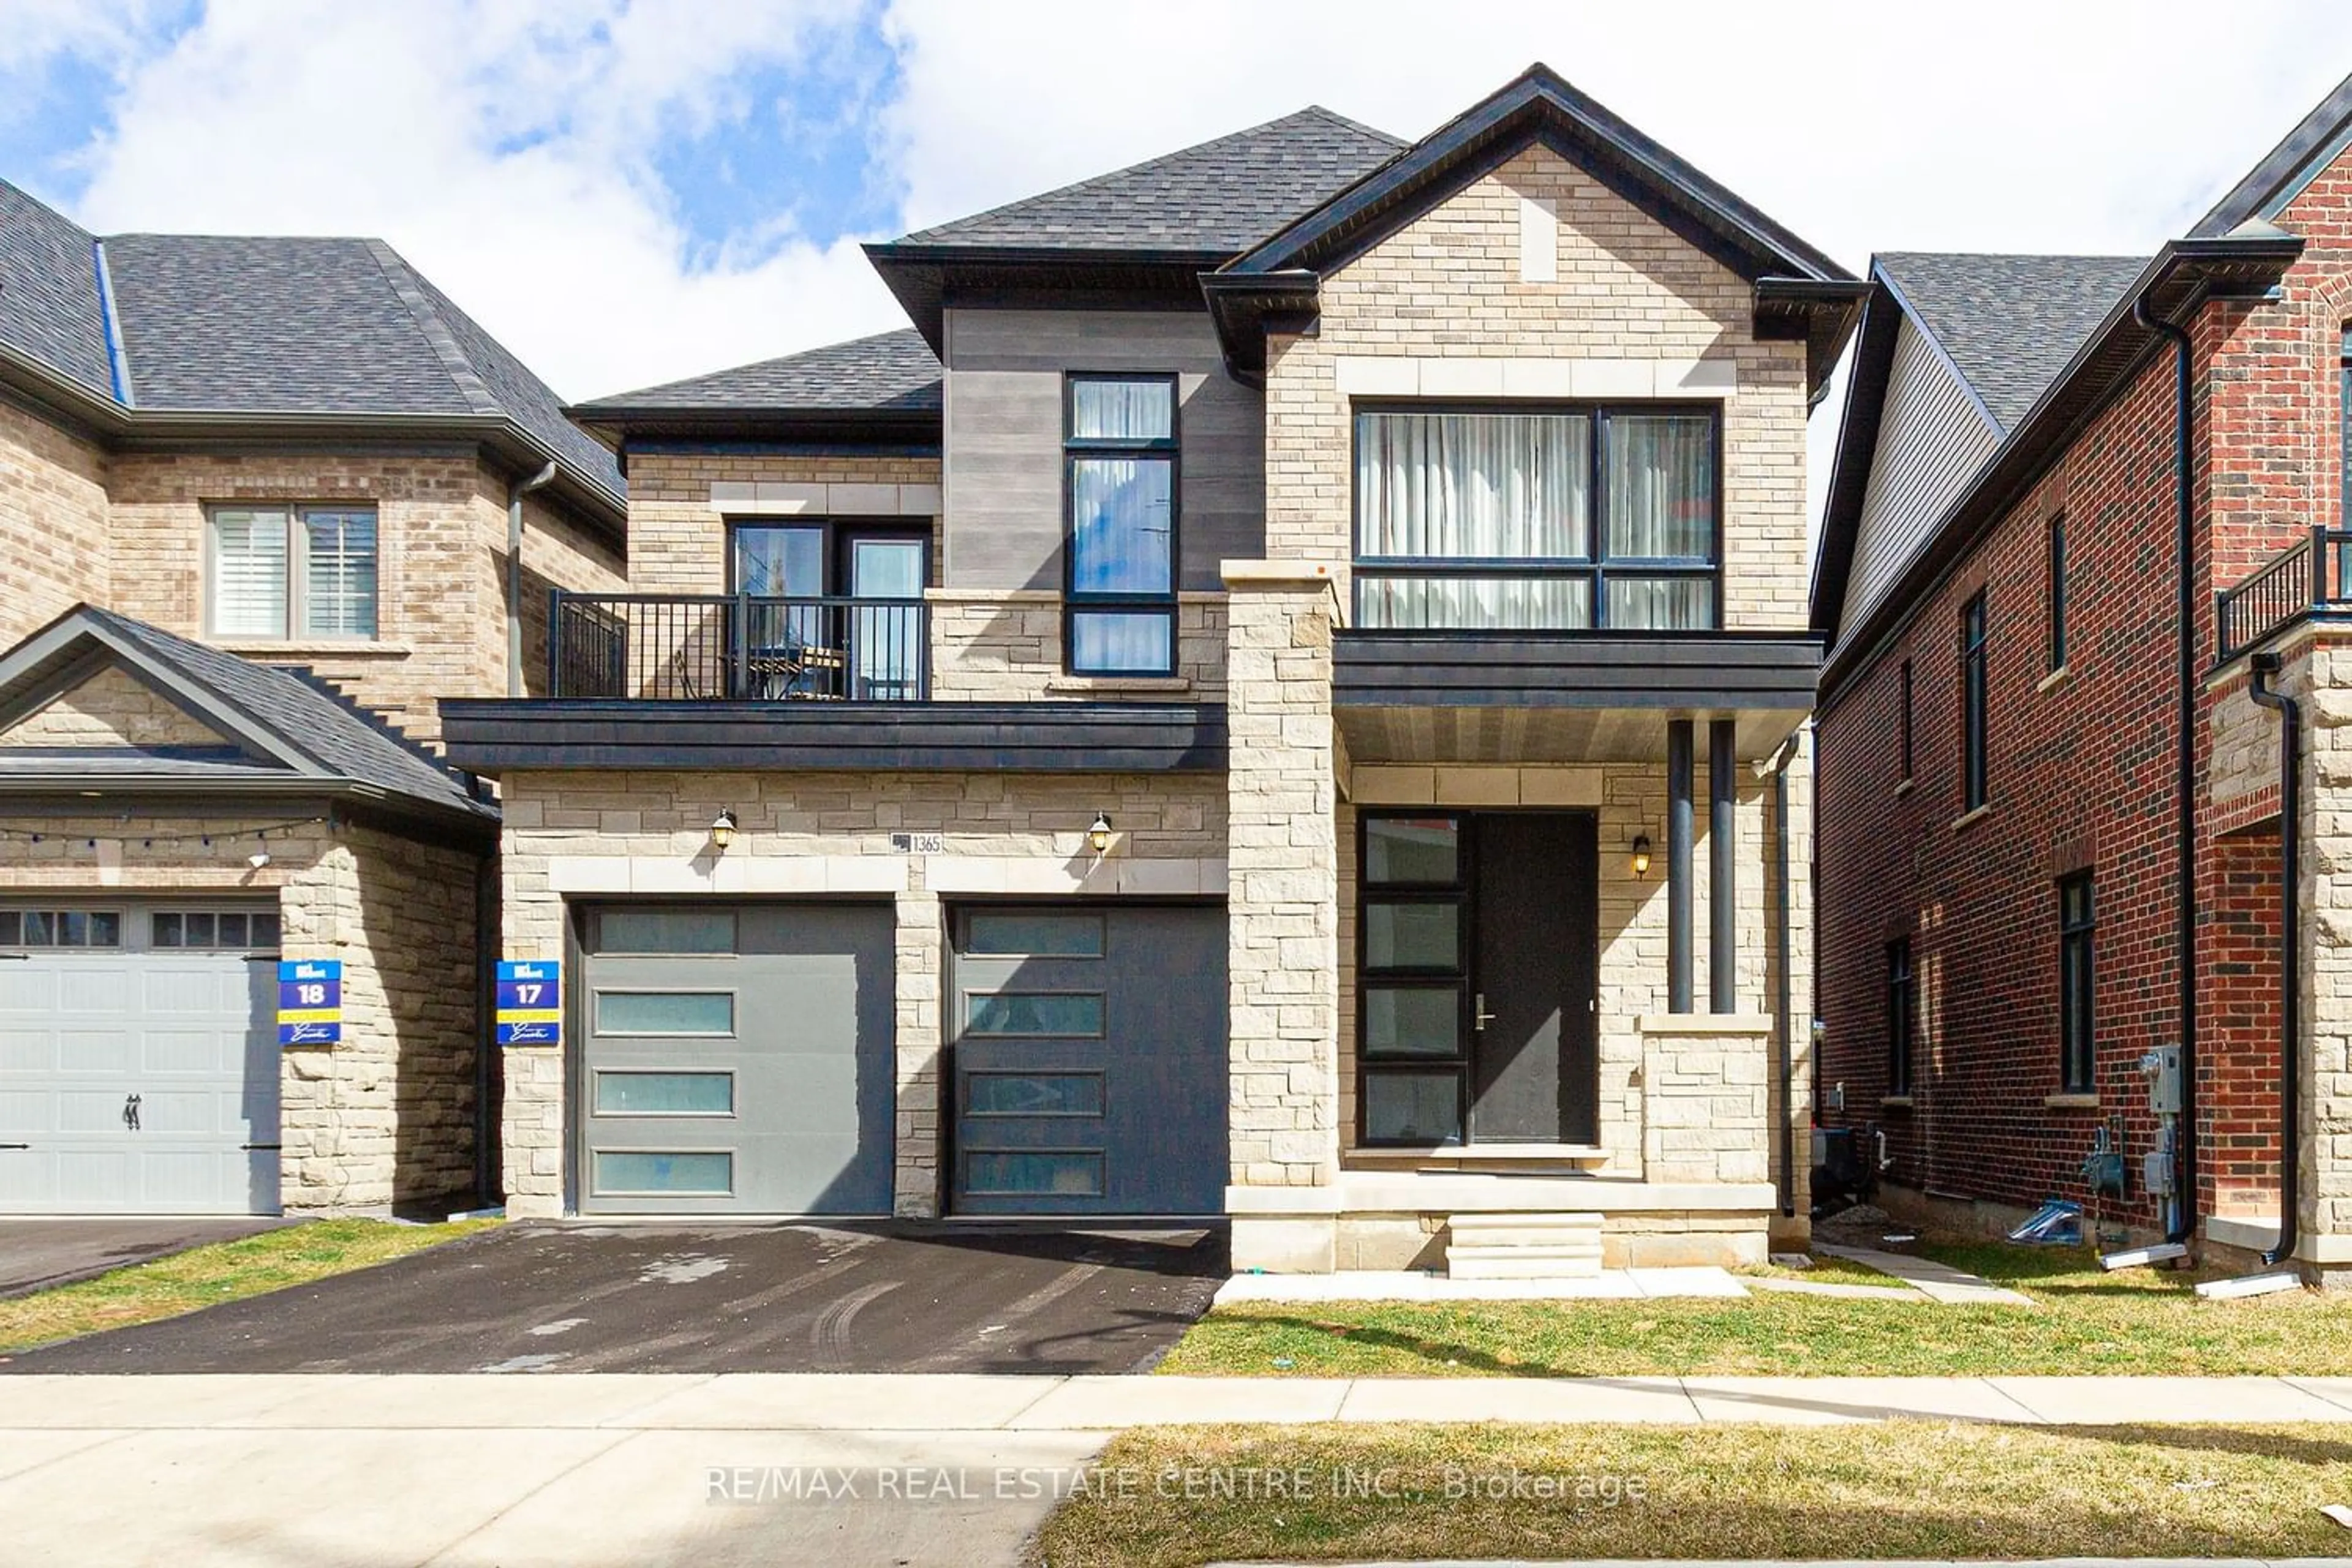 Home with brick exterior material for 1365 Yellow Rose Circ, Oakville Ontario L6M 4G3